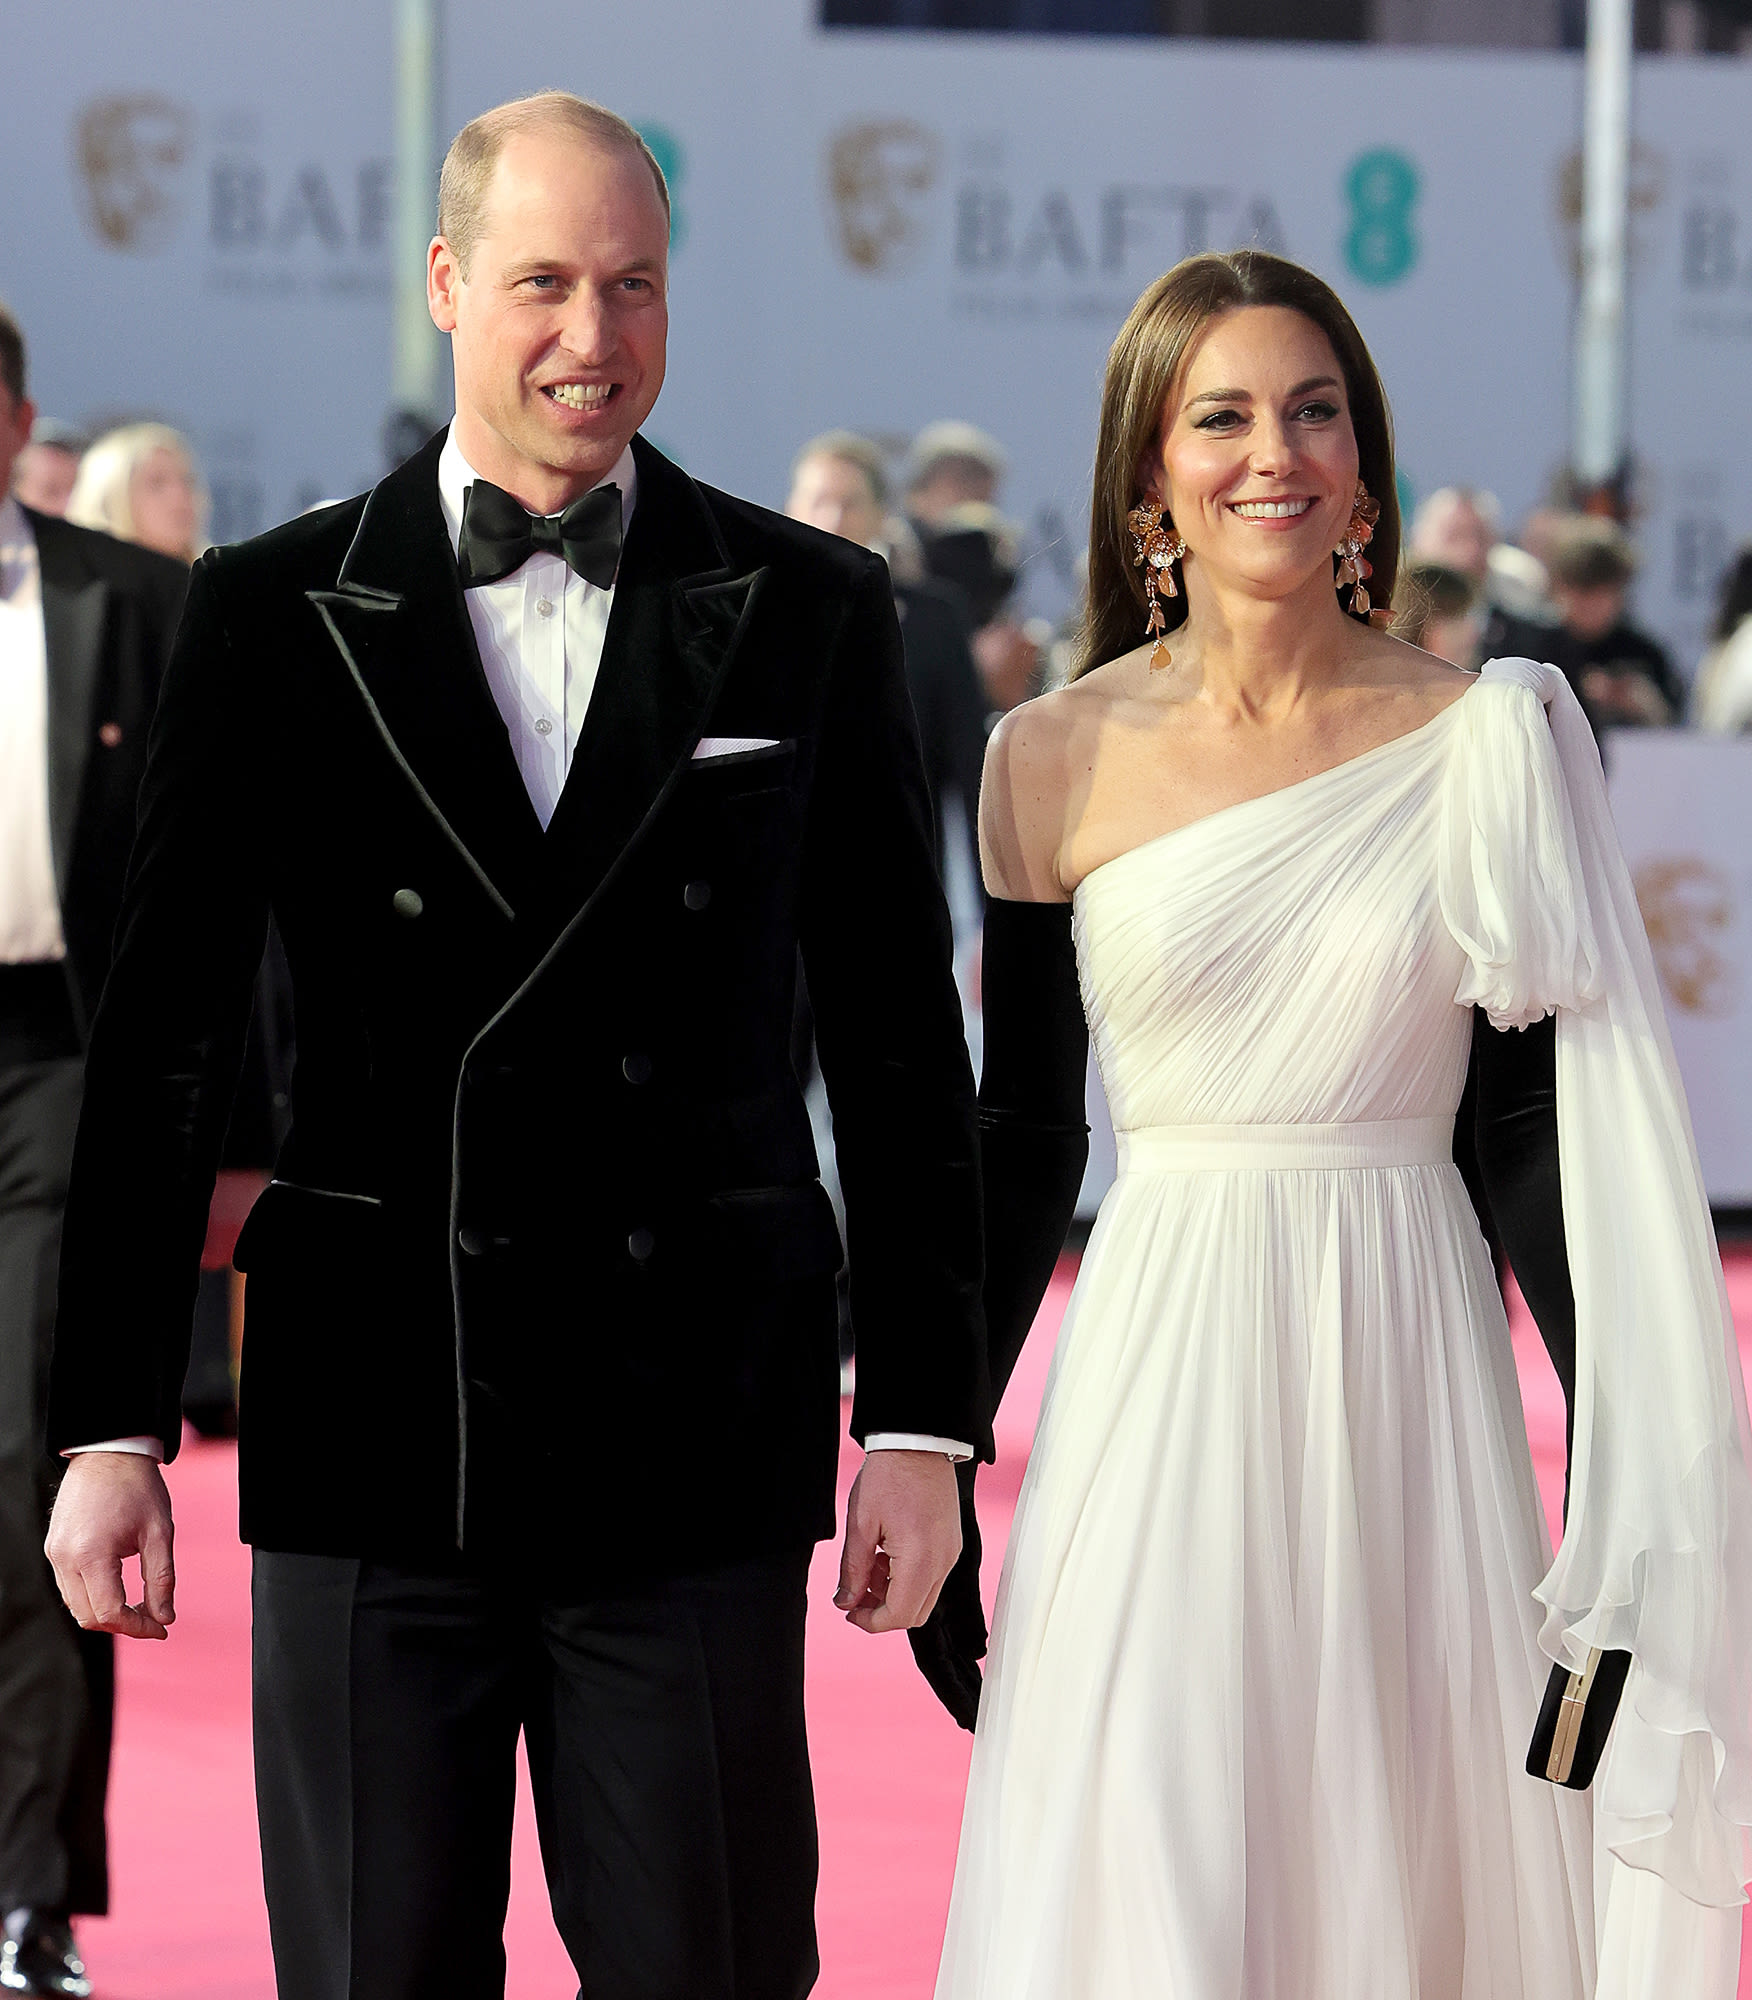 Prince William and Kate Middleton Won’t Attend BAFTA TV Awards Amid Her Cancer Battle